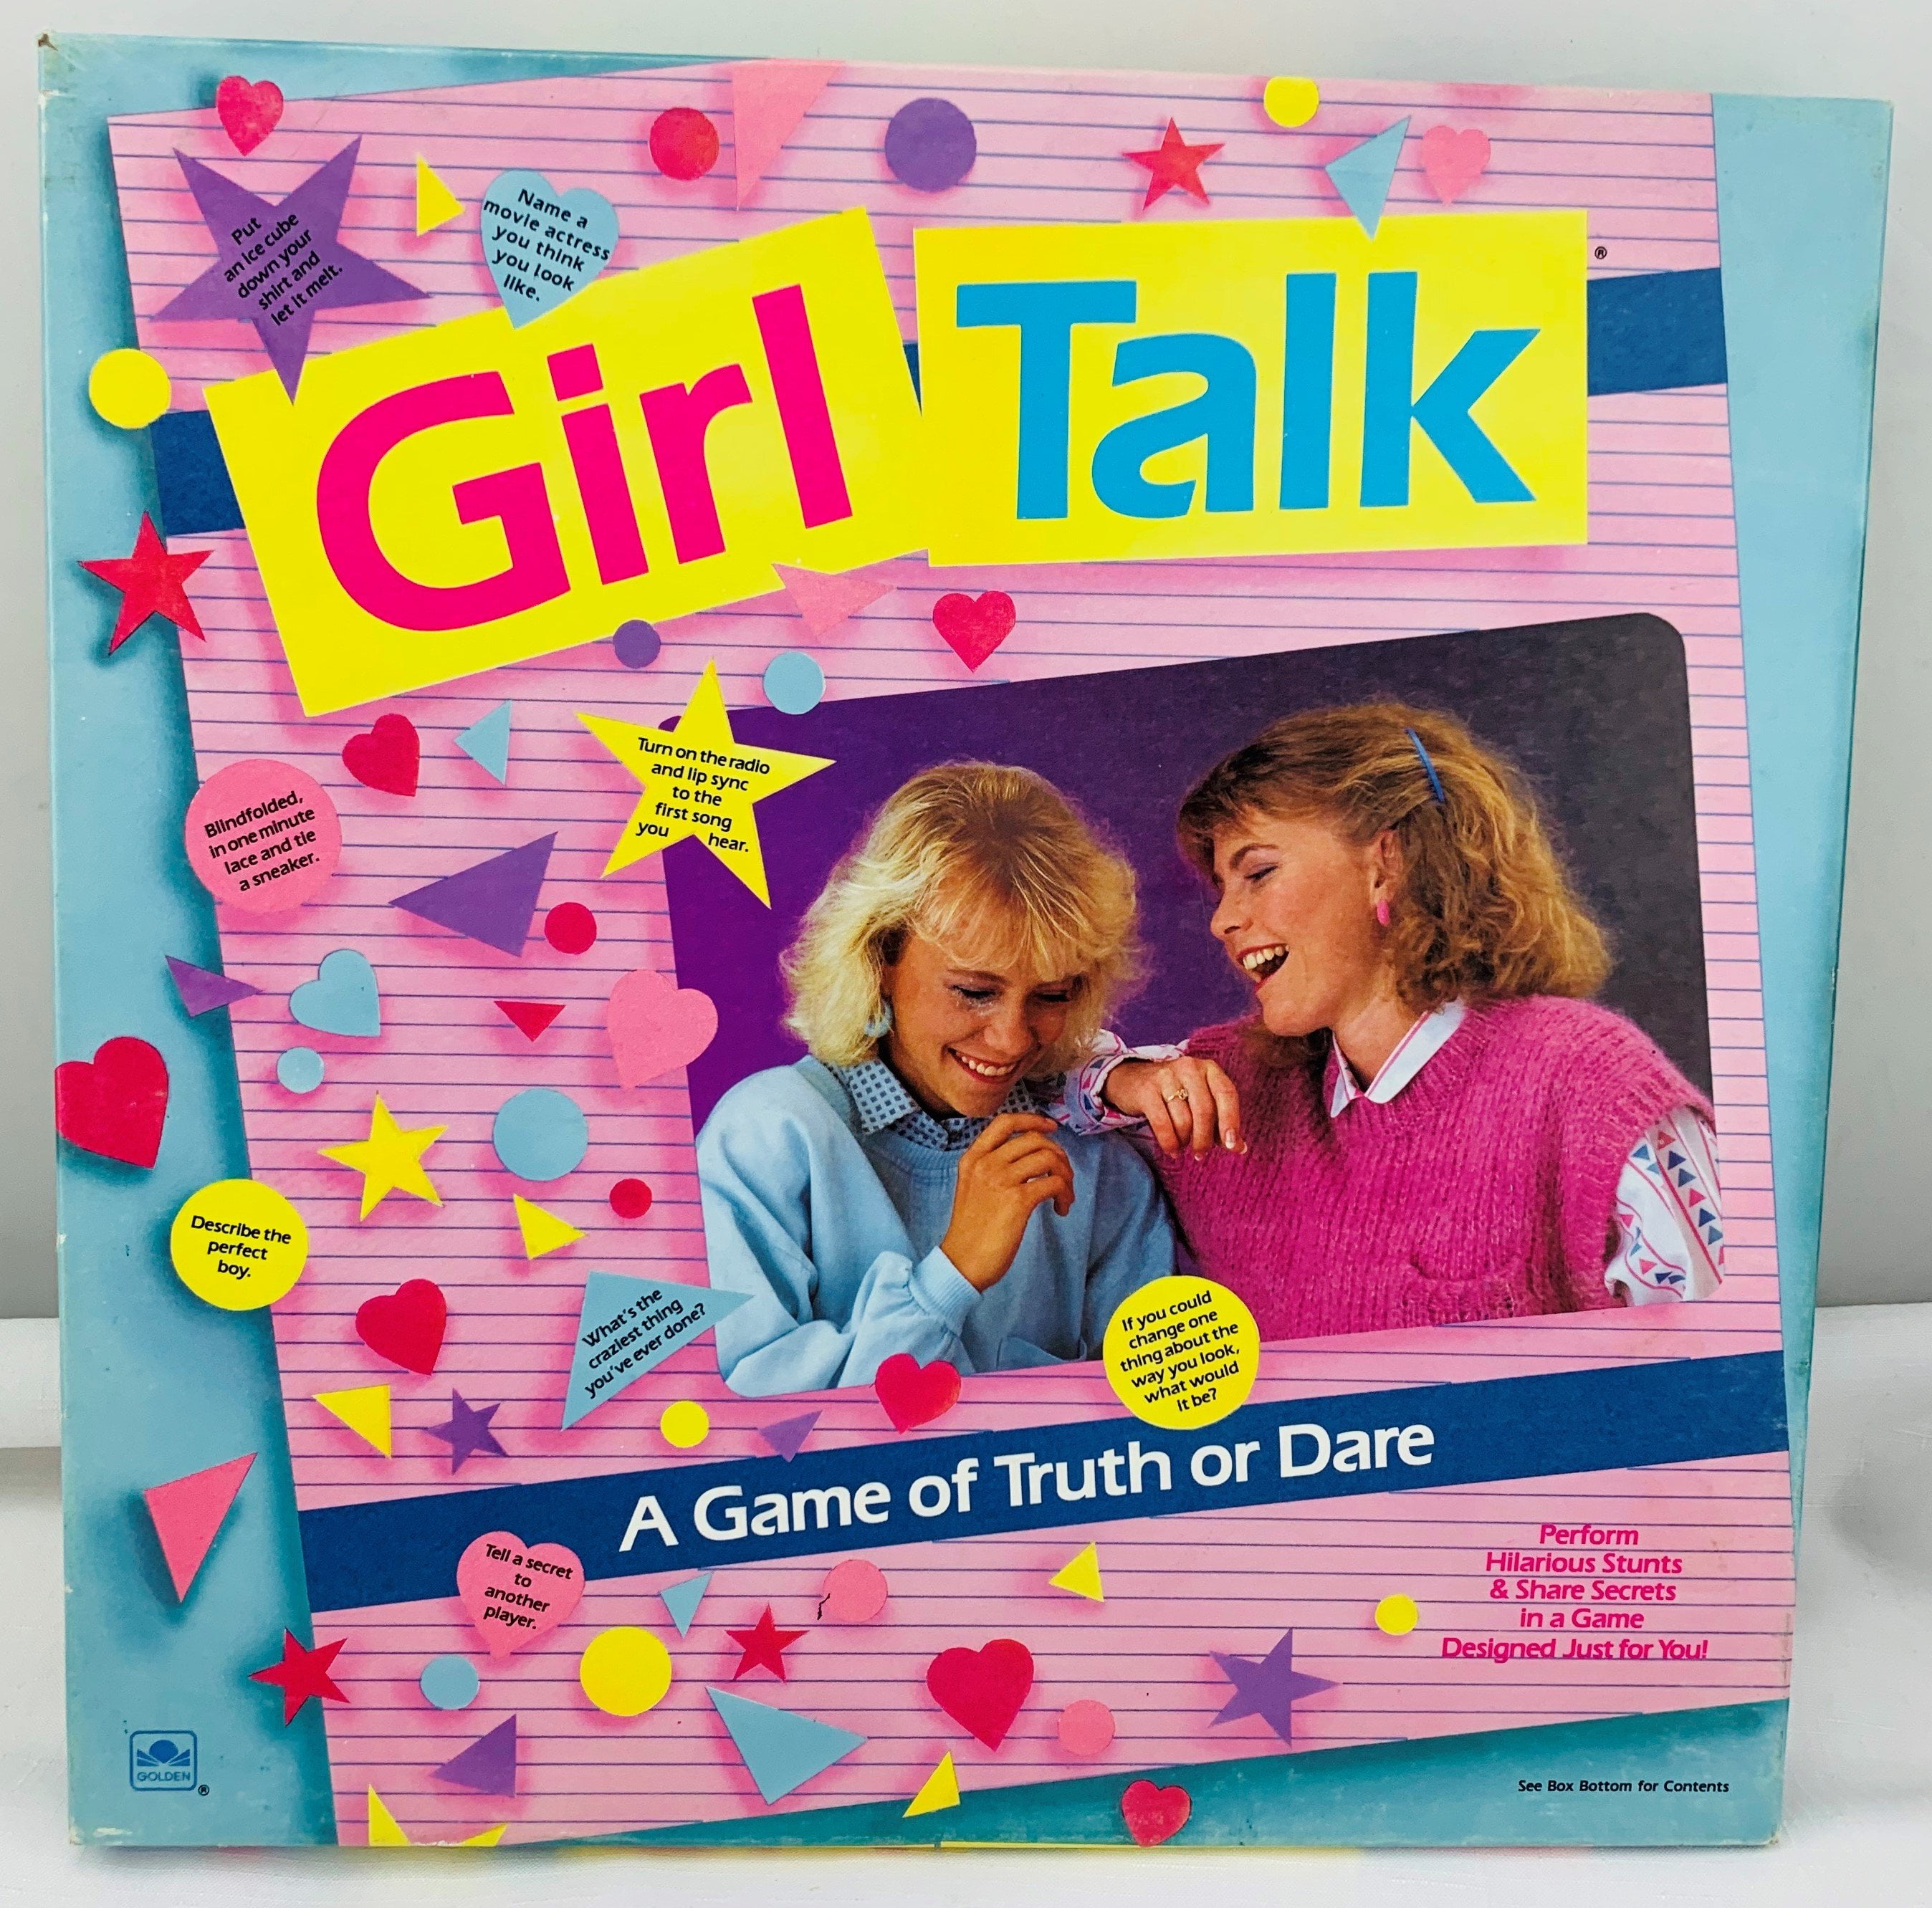 1988 Girl Talk Game by Golden Complete in Great Condition FREE SHIPPING 